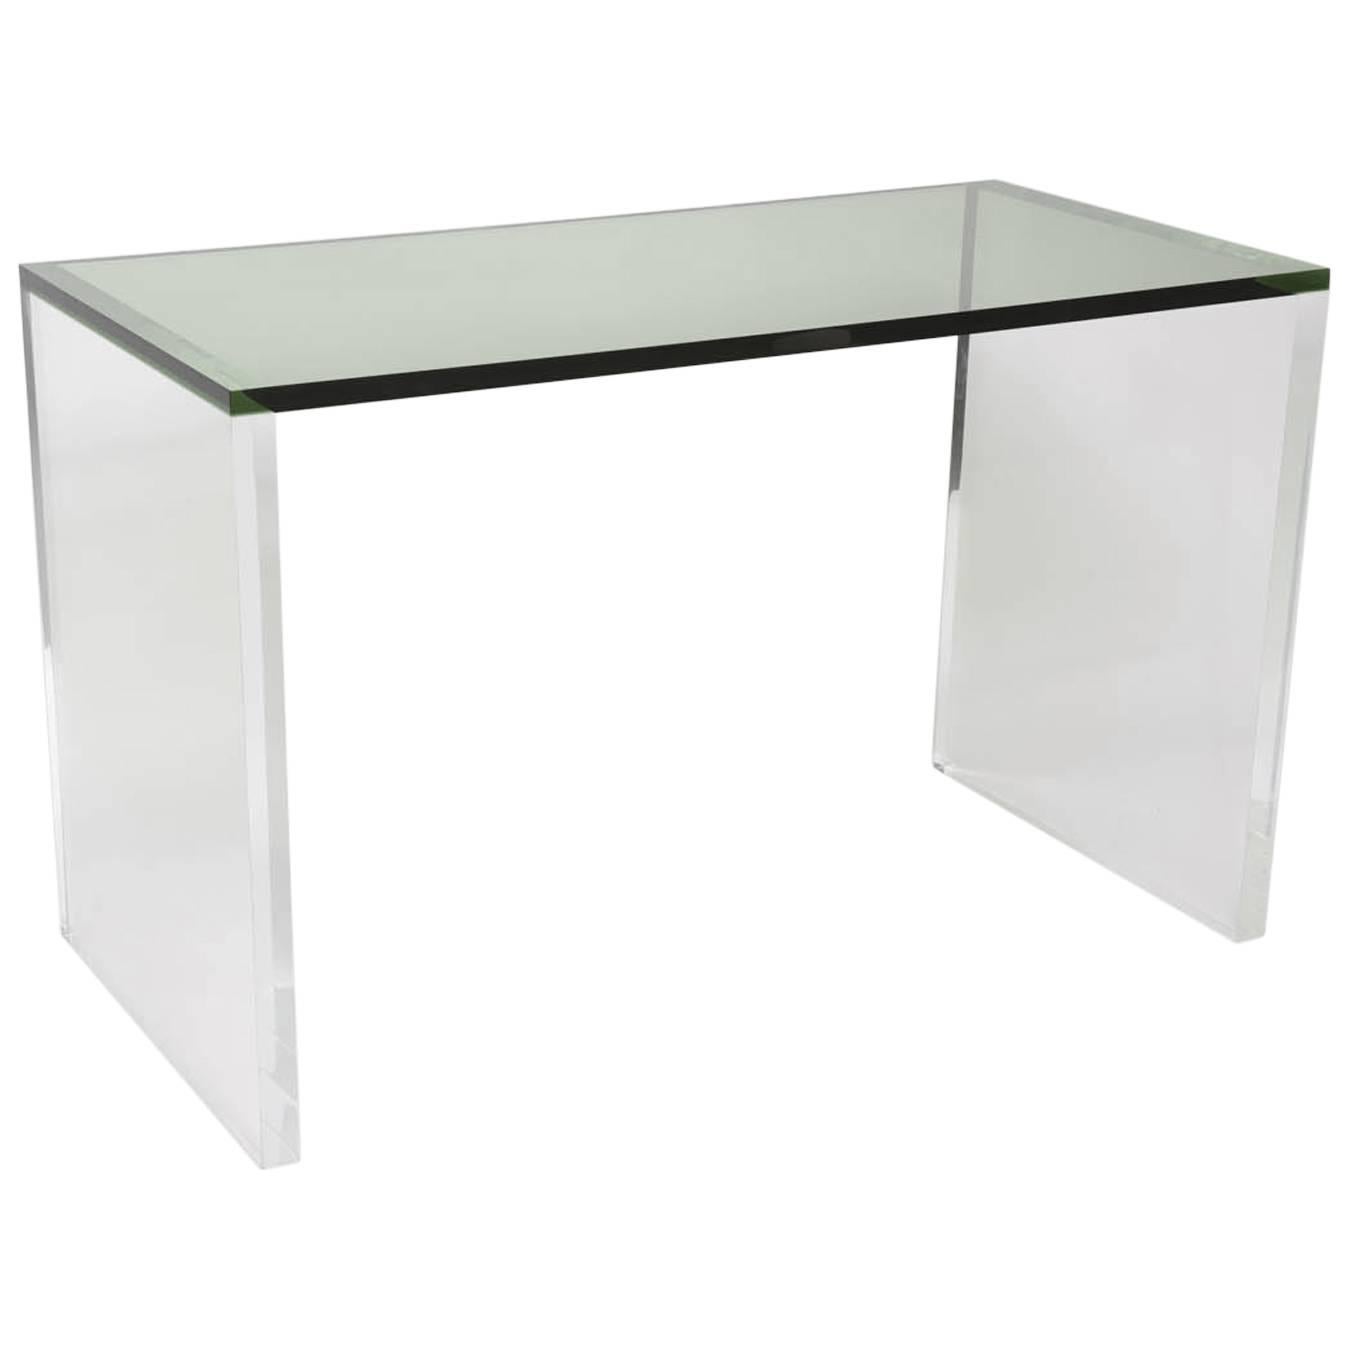 Two-Toned Acrylic Desk in Green and Clear